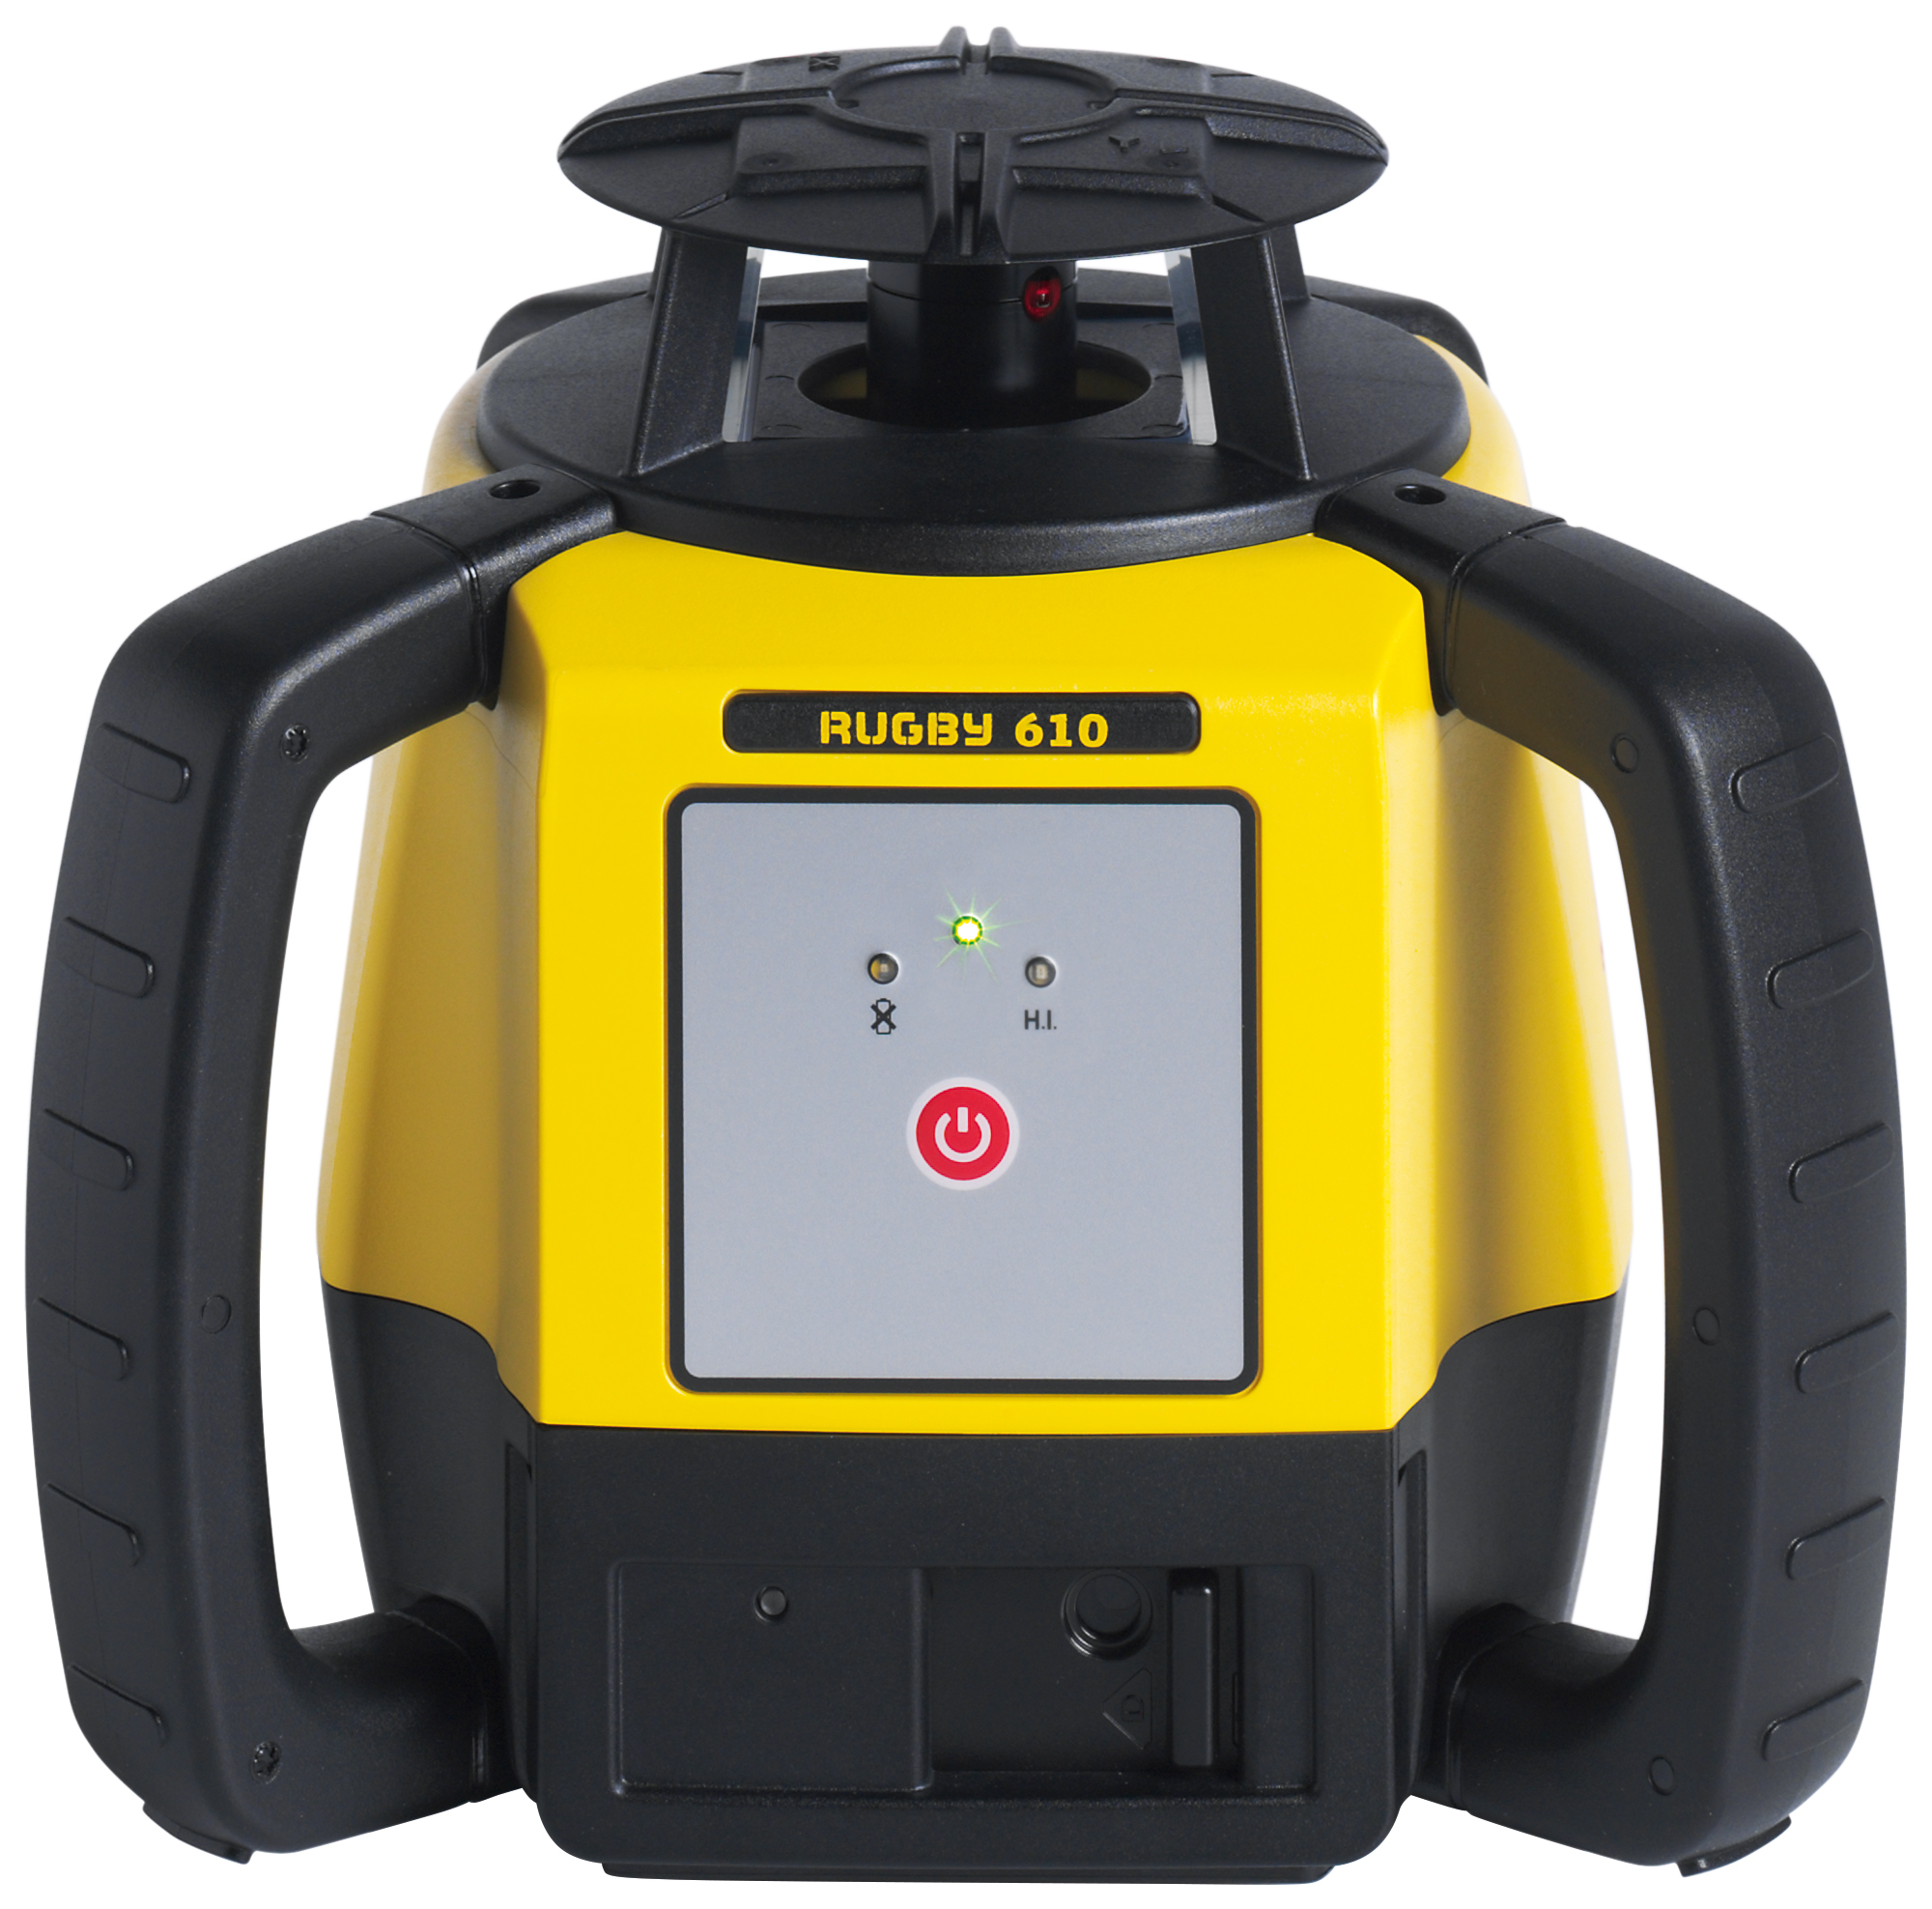 Image of Leica Rugby 610 RE120 Li-ion Self Levelling Rotating Laser Level